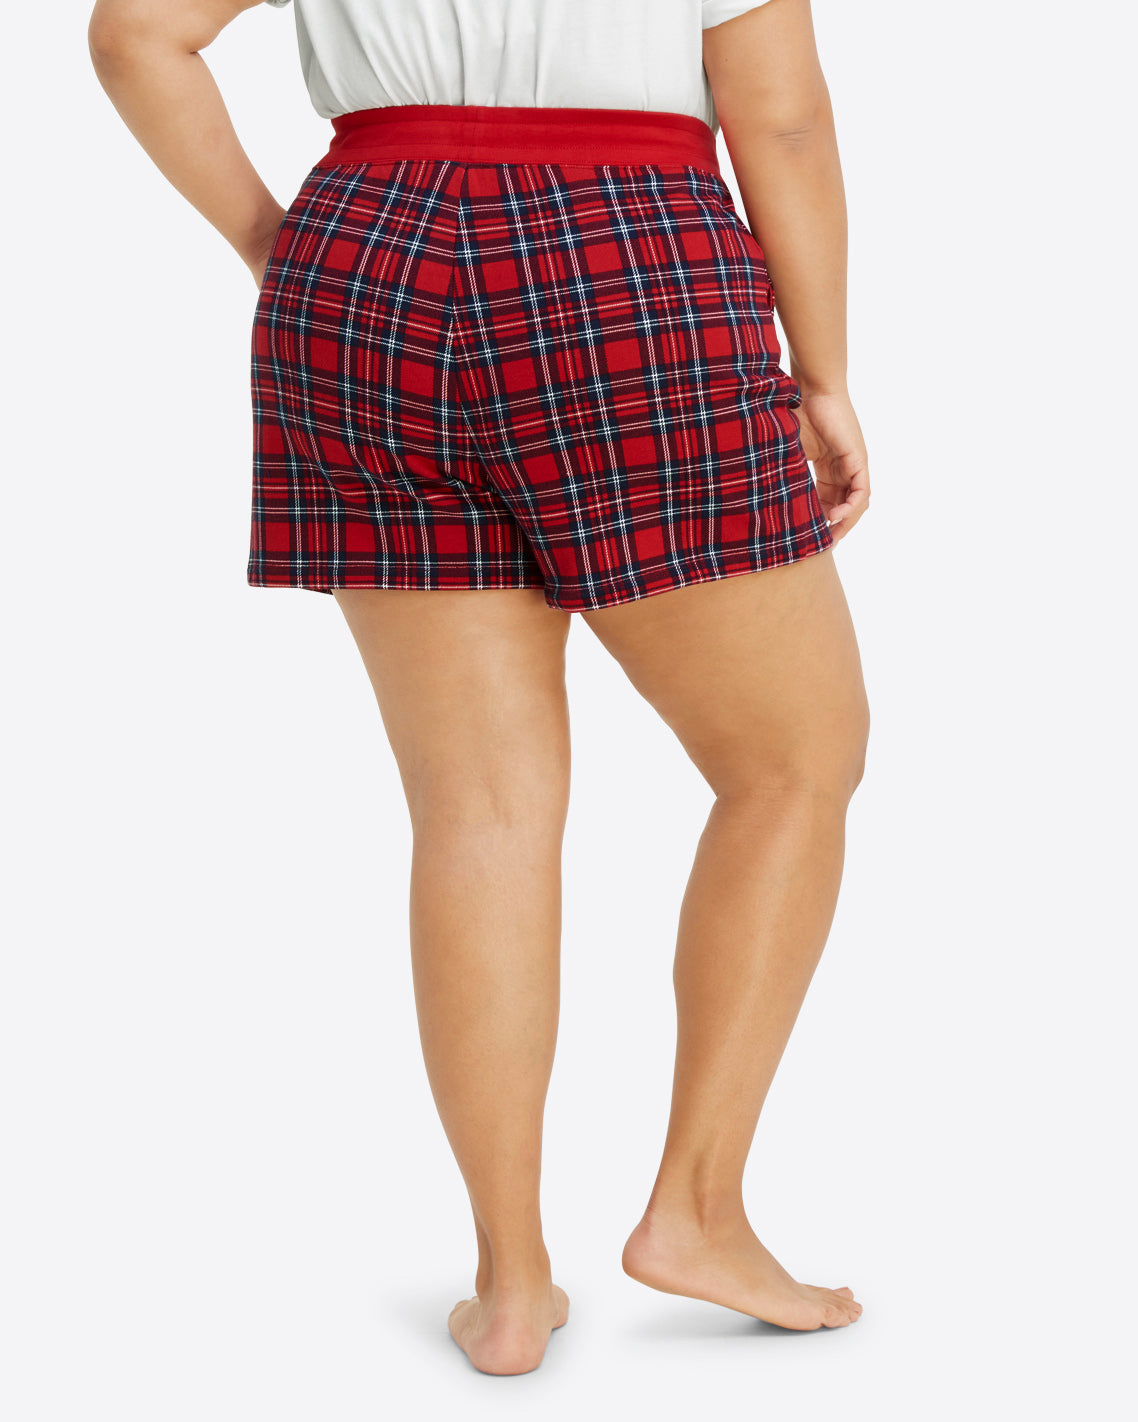 Natalie Sweat Shorts in Angie Plaid